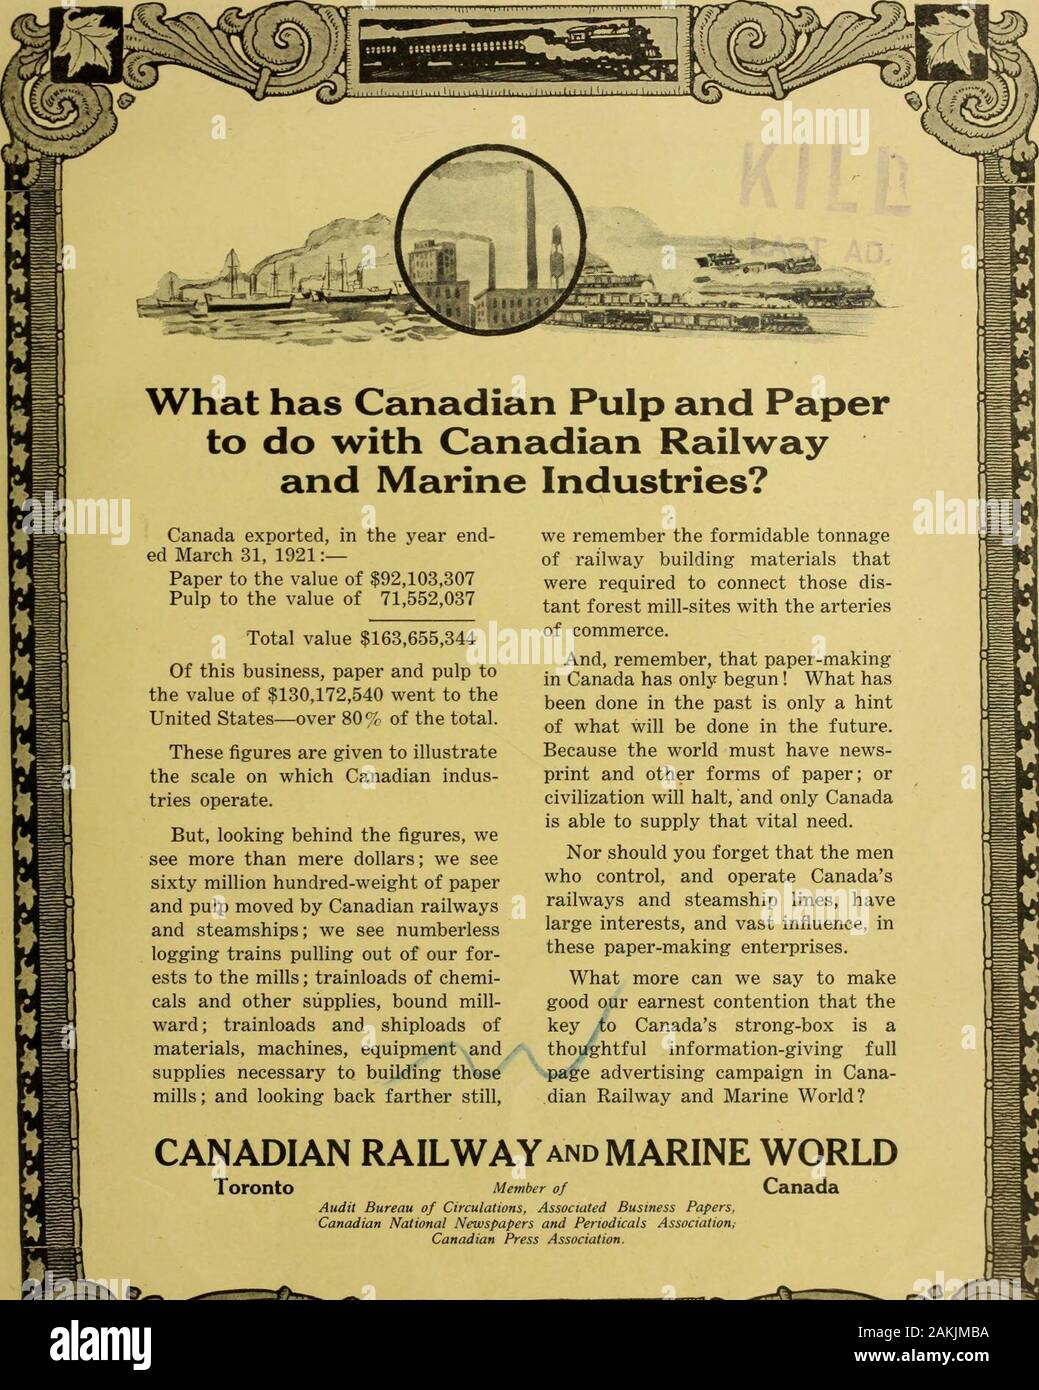 Canadian transportation & distribution management . n Electric Co — Norton, A. O., Ltd 28 O Ohio Brass Co 48 Orton & Steinbrenner Co 40 P Page-Hersey Tubes, Ltd 27 Peacock Bros 14 Pedlar People, Ltd 32 Piper, The Hiram L., Co 46 Pratt & Whitney Co. of Canada 42 Prest-O-Lite Co 22 R Rail Joint Co. of Canada 53 Railway & Power Engineering Corp 21 Reid Newfoundland Co 37 Russell, J. E 39 S Safety Car Htg. & Ltg. Co 33 Sinclair, Angus 46 Slater, N., Co 35 Smart-Turner Machine Co 51 Standard Car Truck Co 58 Standard Underground Cable Co. ? of Canada 46 Star Brass Works 29 Steel Co. of Canada 6 Stra Stock Photo